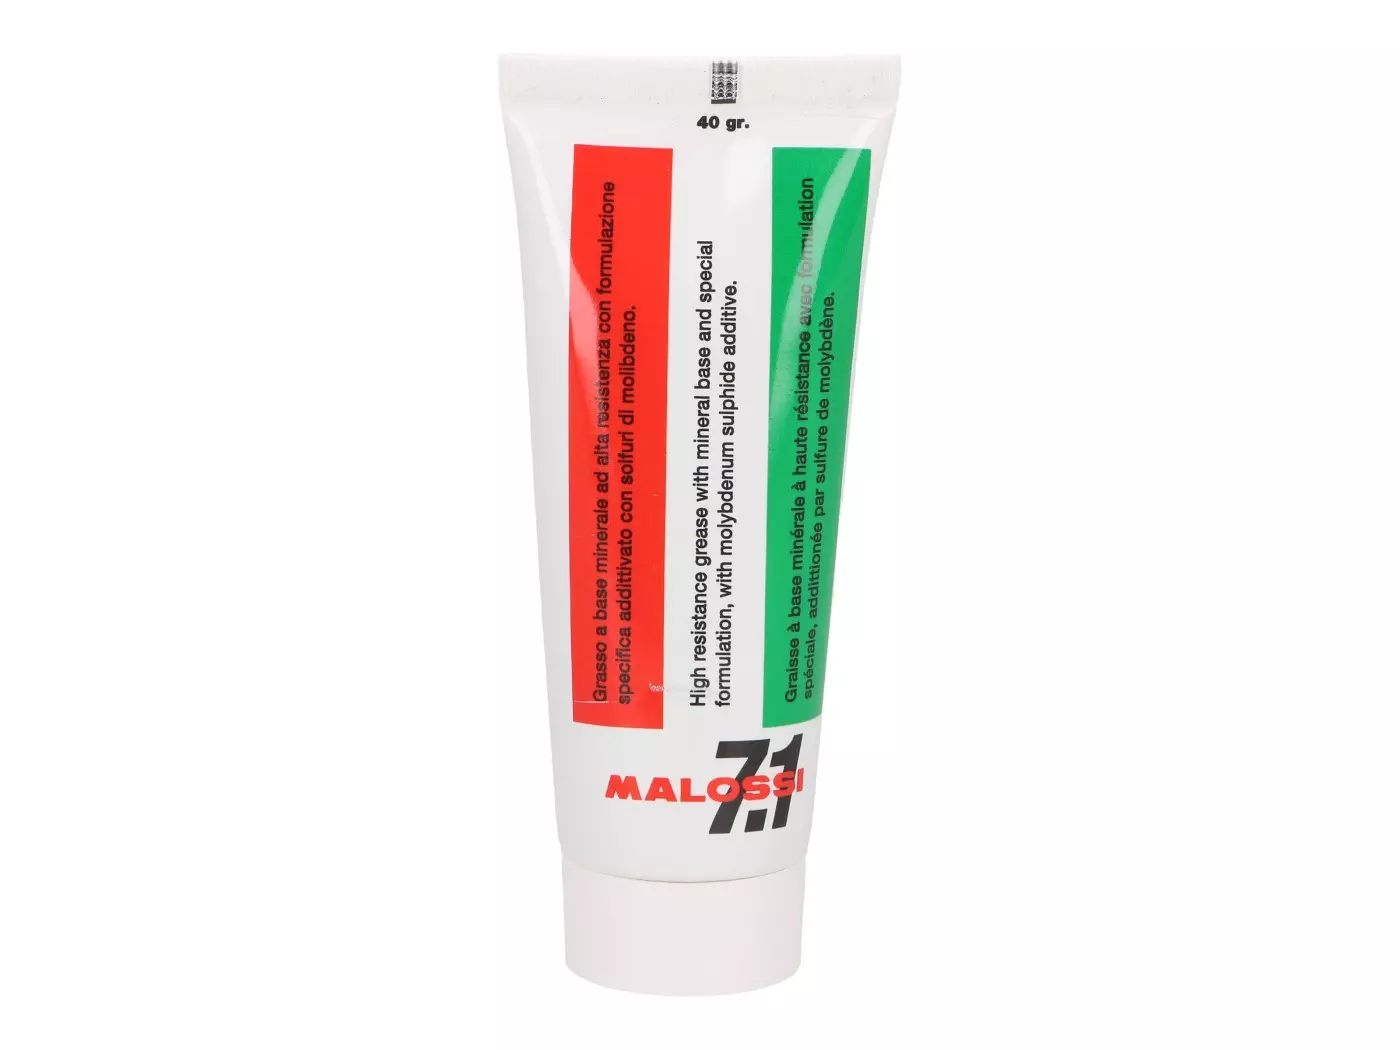 High Resistance Grease Malossi MRG For Torque Drivers 40g = M.7615375B